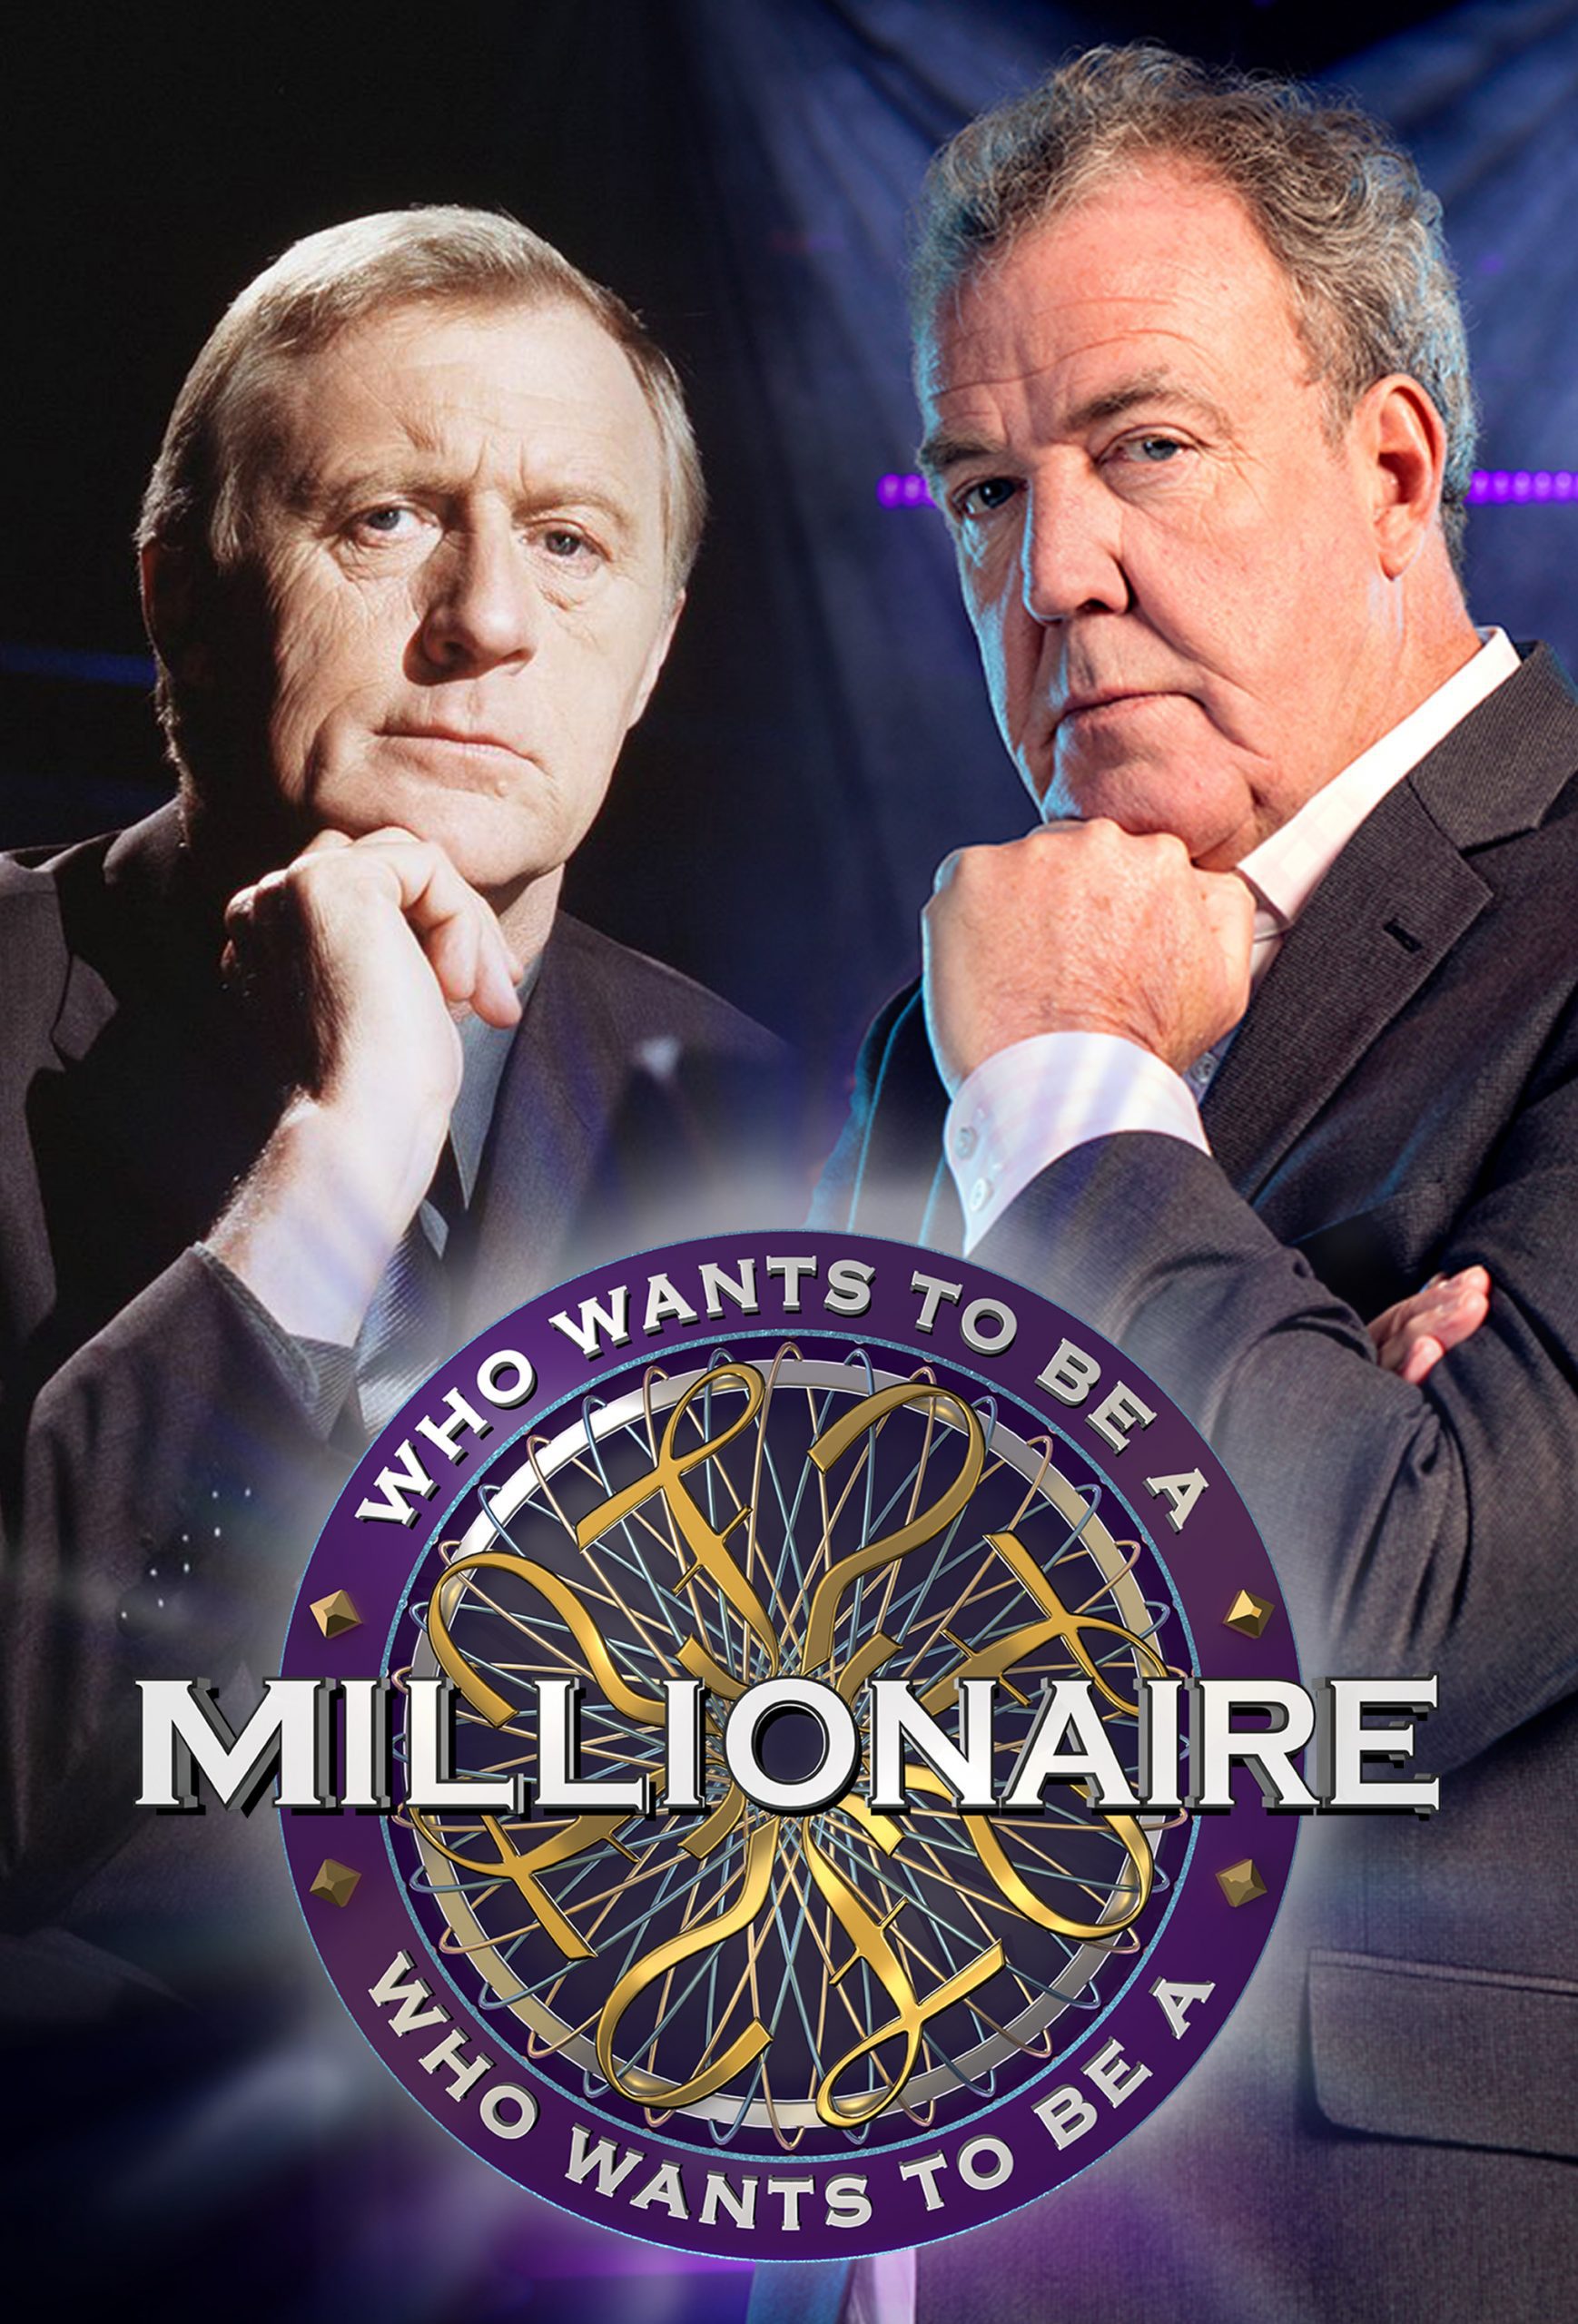 Who wants to be a millionaire PC?